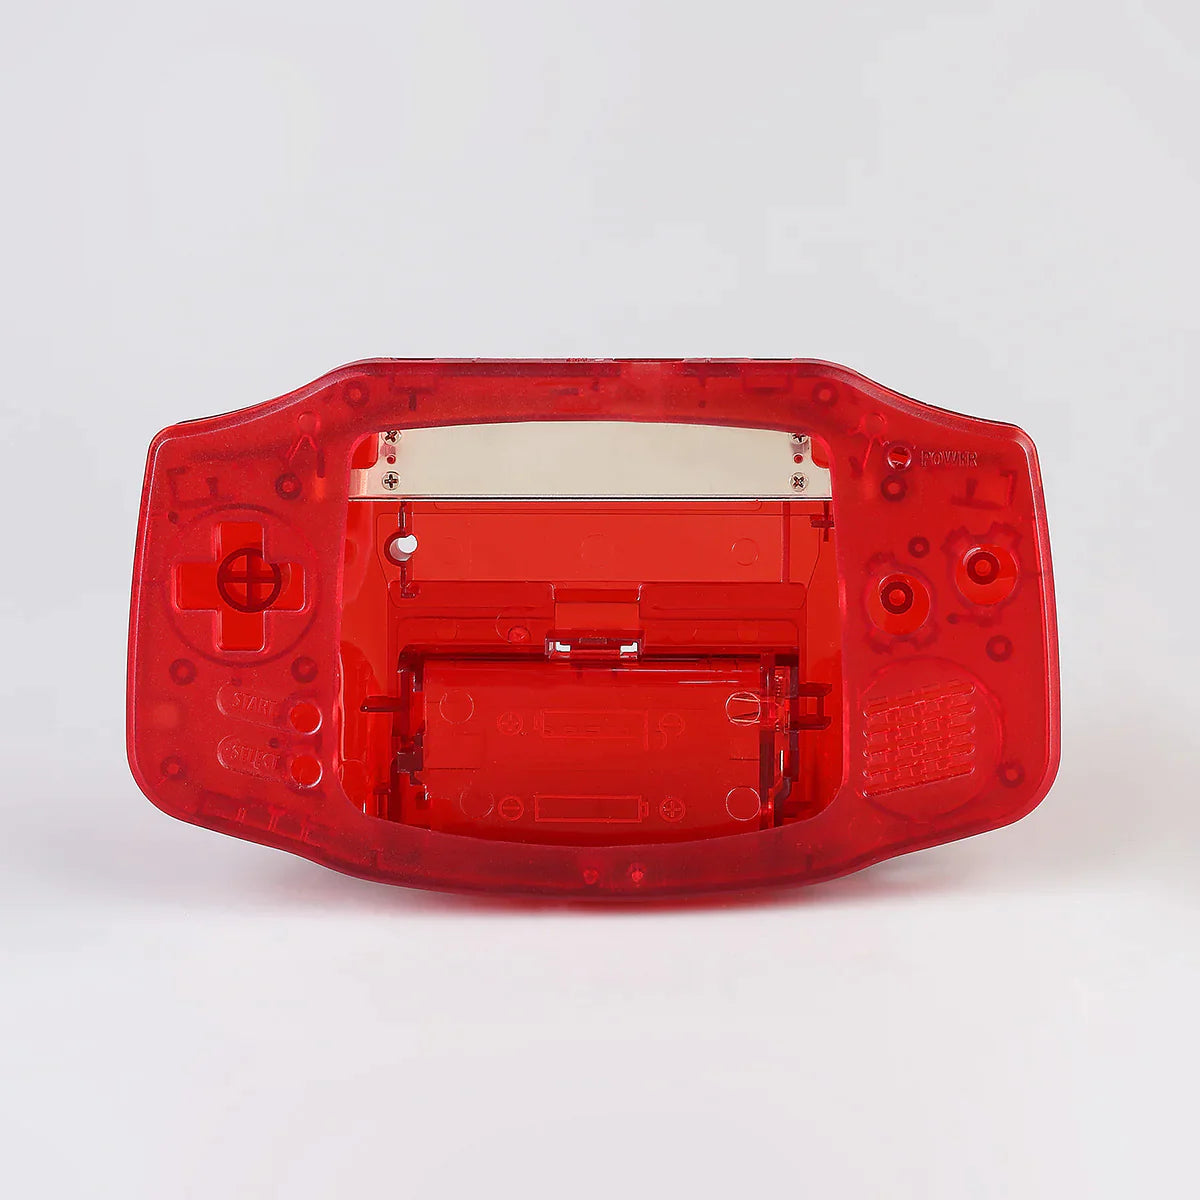 FunnyPlaying Game Boy Advance GBA Shells For Laminated IPS LCD